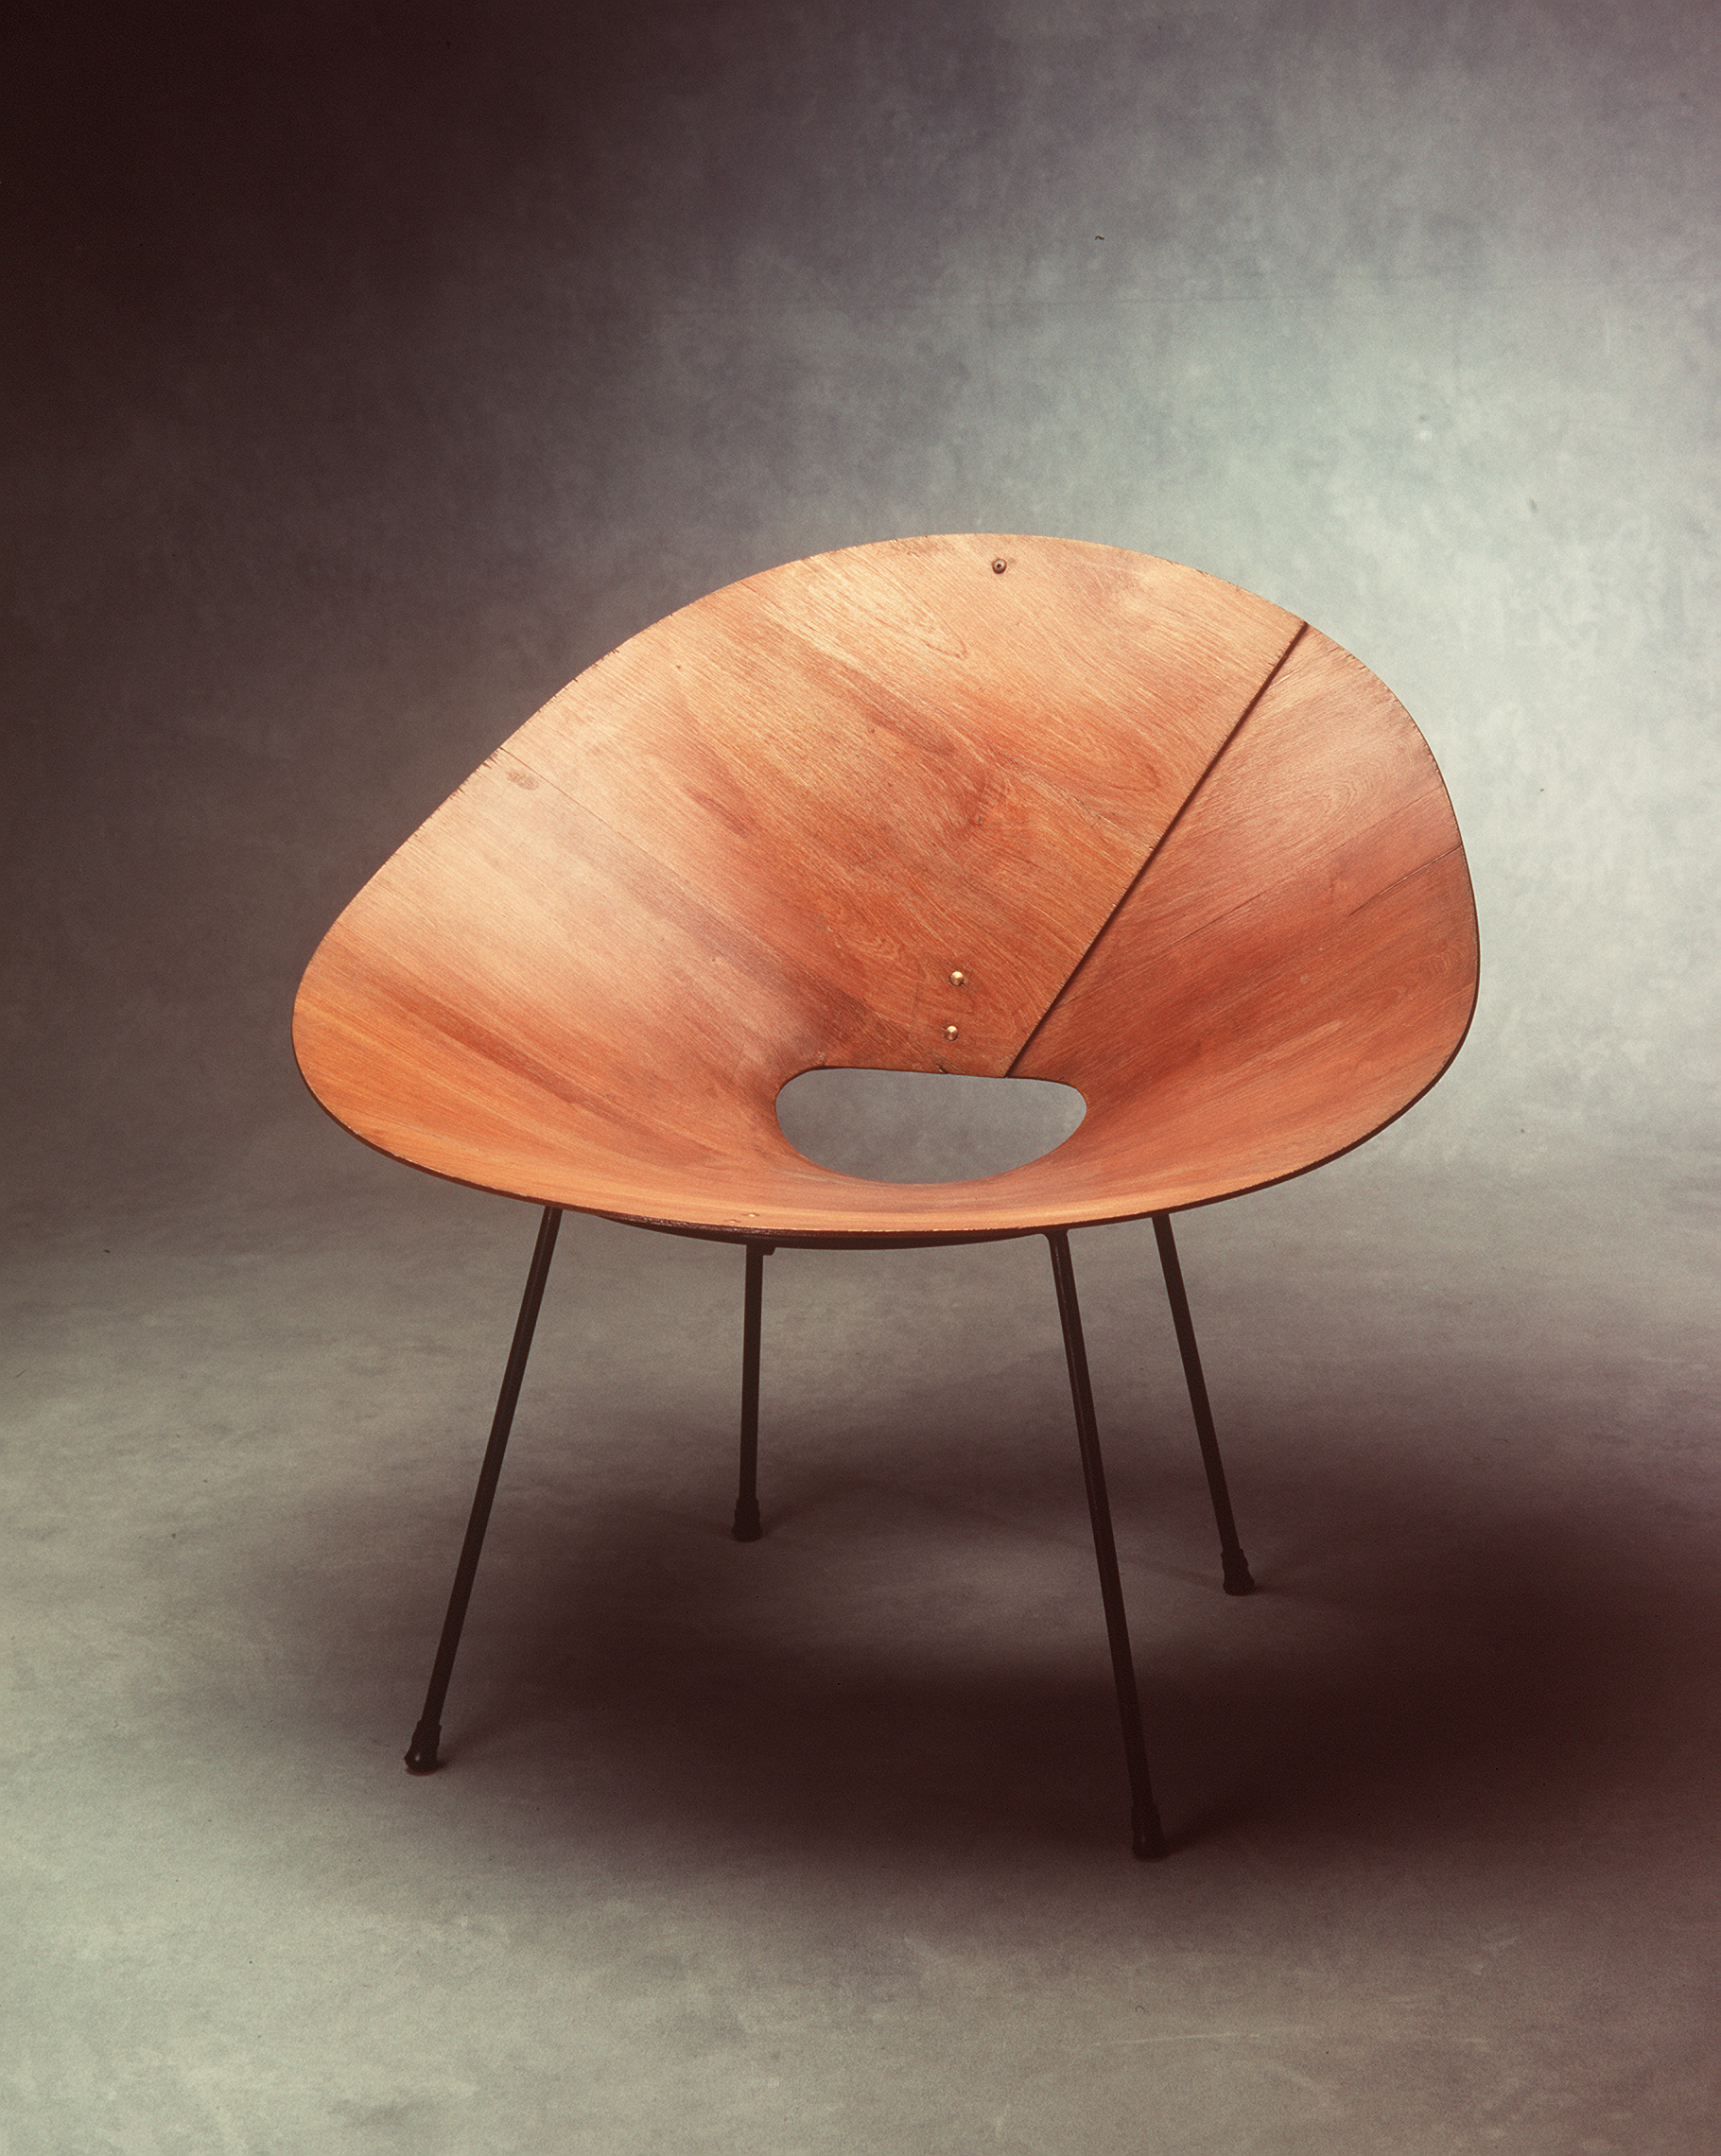 'Kone' plywood chair shells by Roger McLay